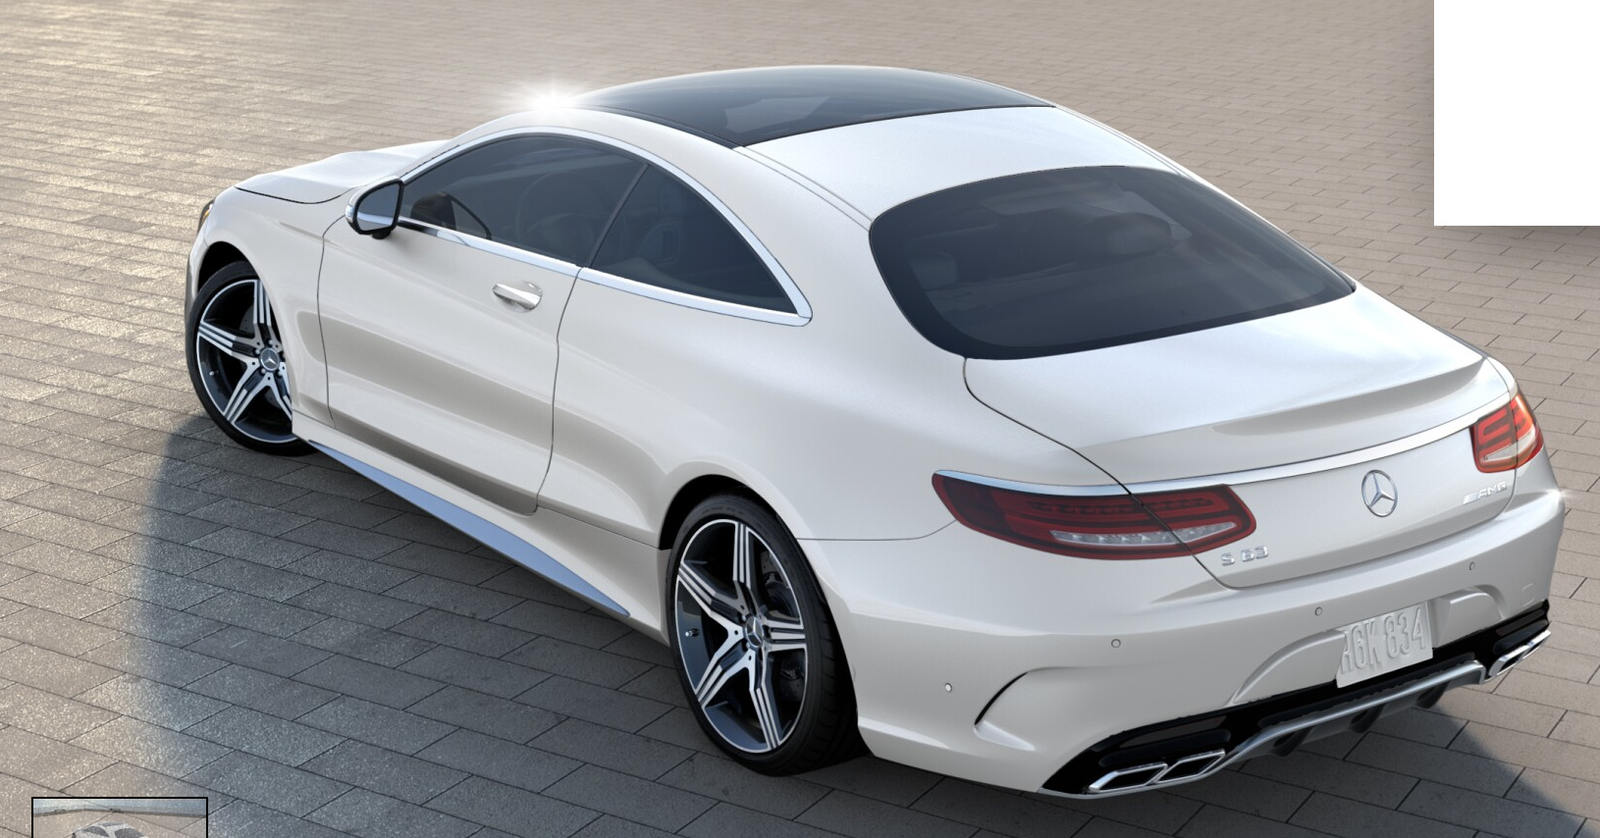 New 2015 / 2016 Mercedes-Benz S-Class For Sale - CarGurus